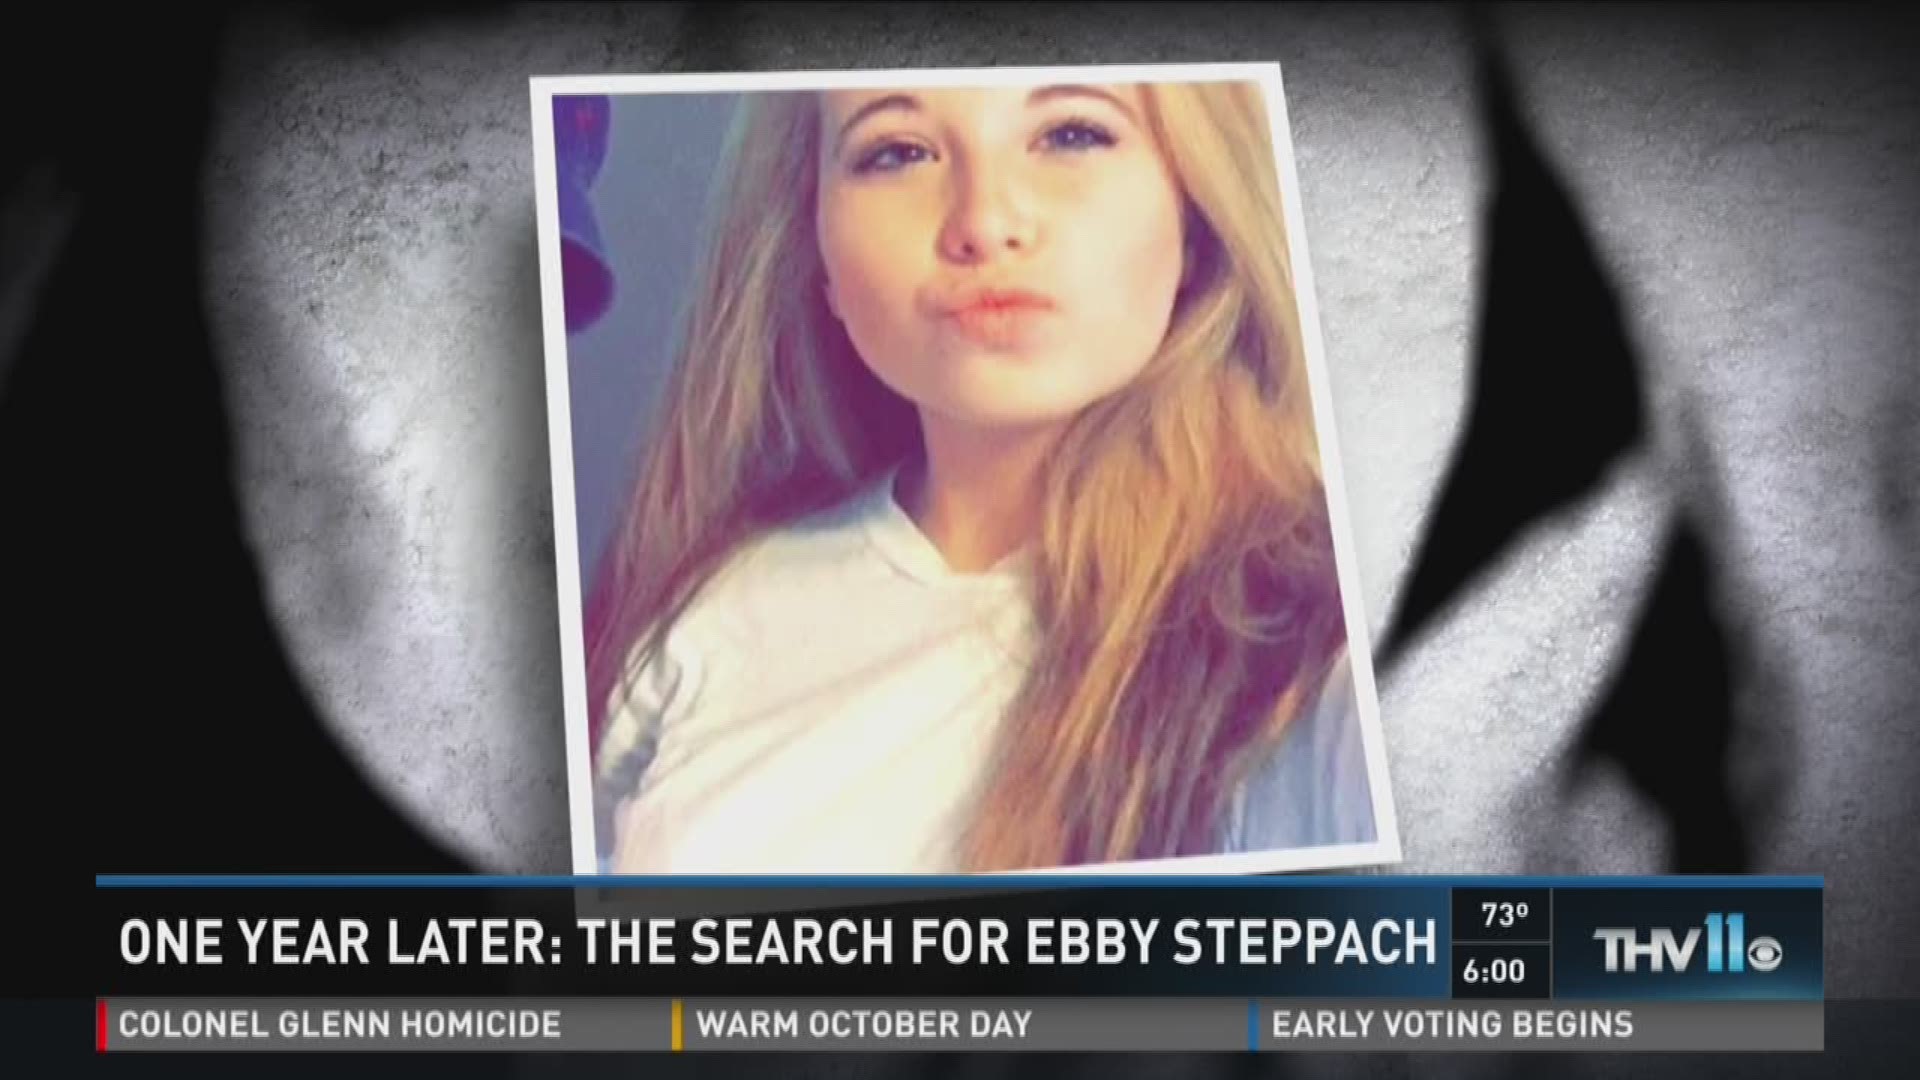 The Search For Ebby Steppach Enters Its Second Year